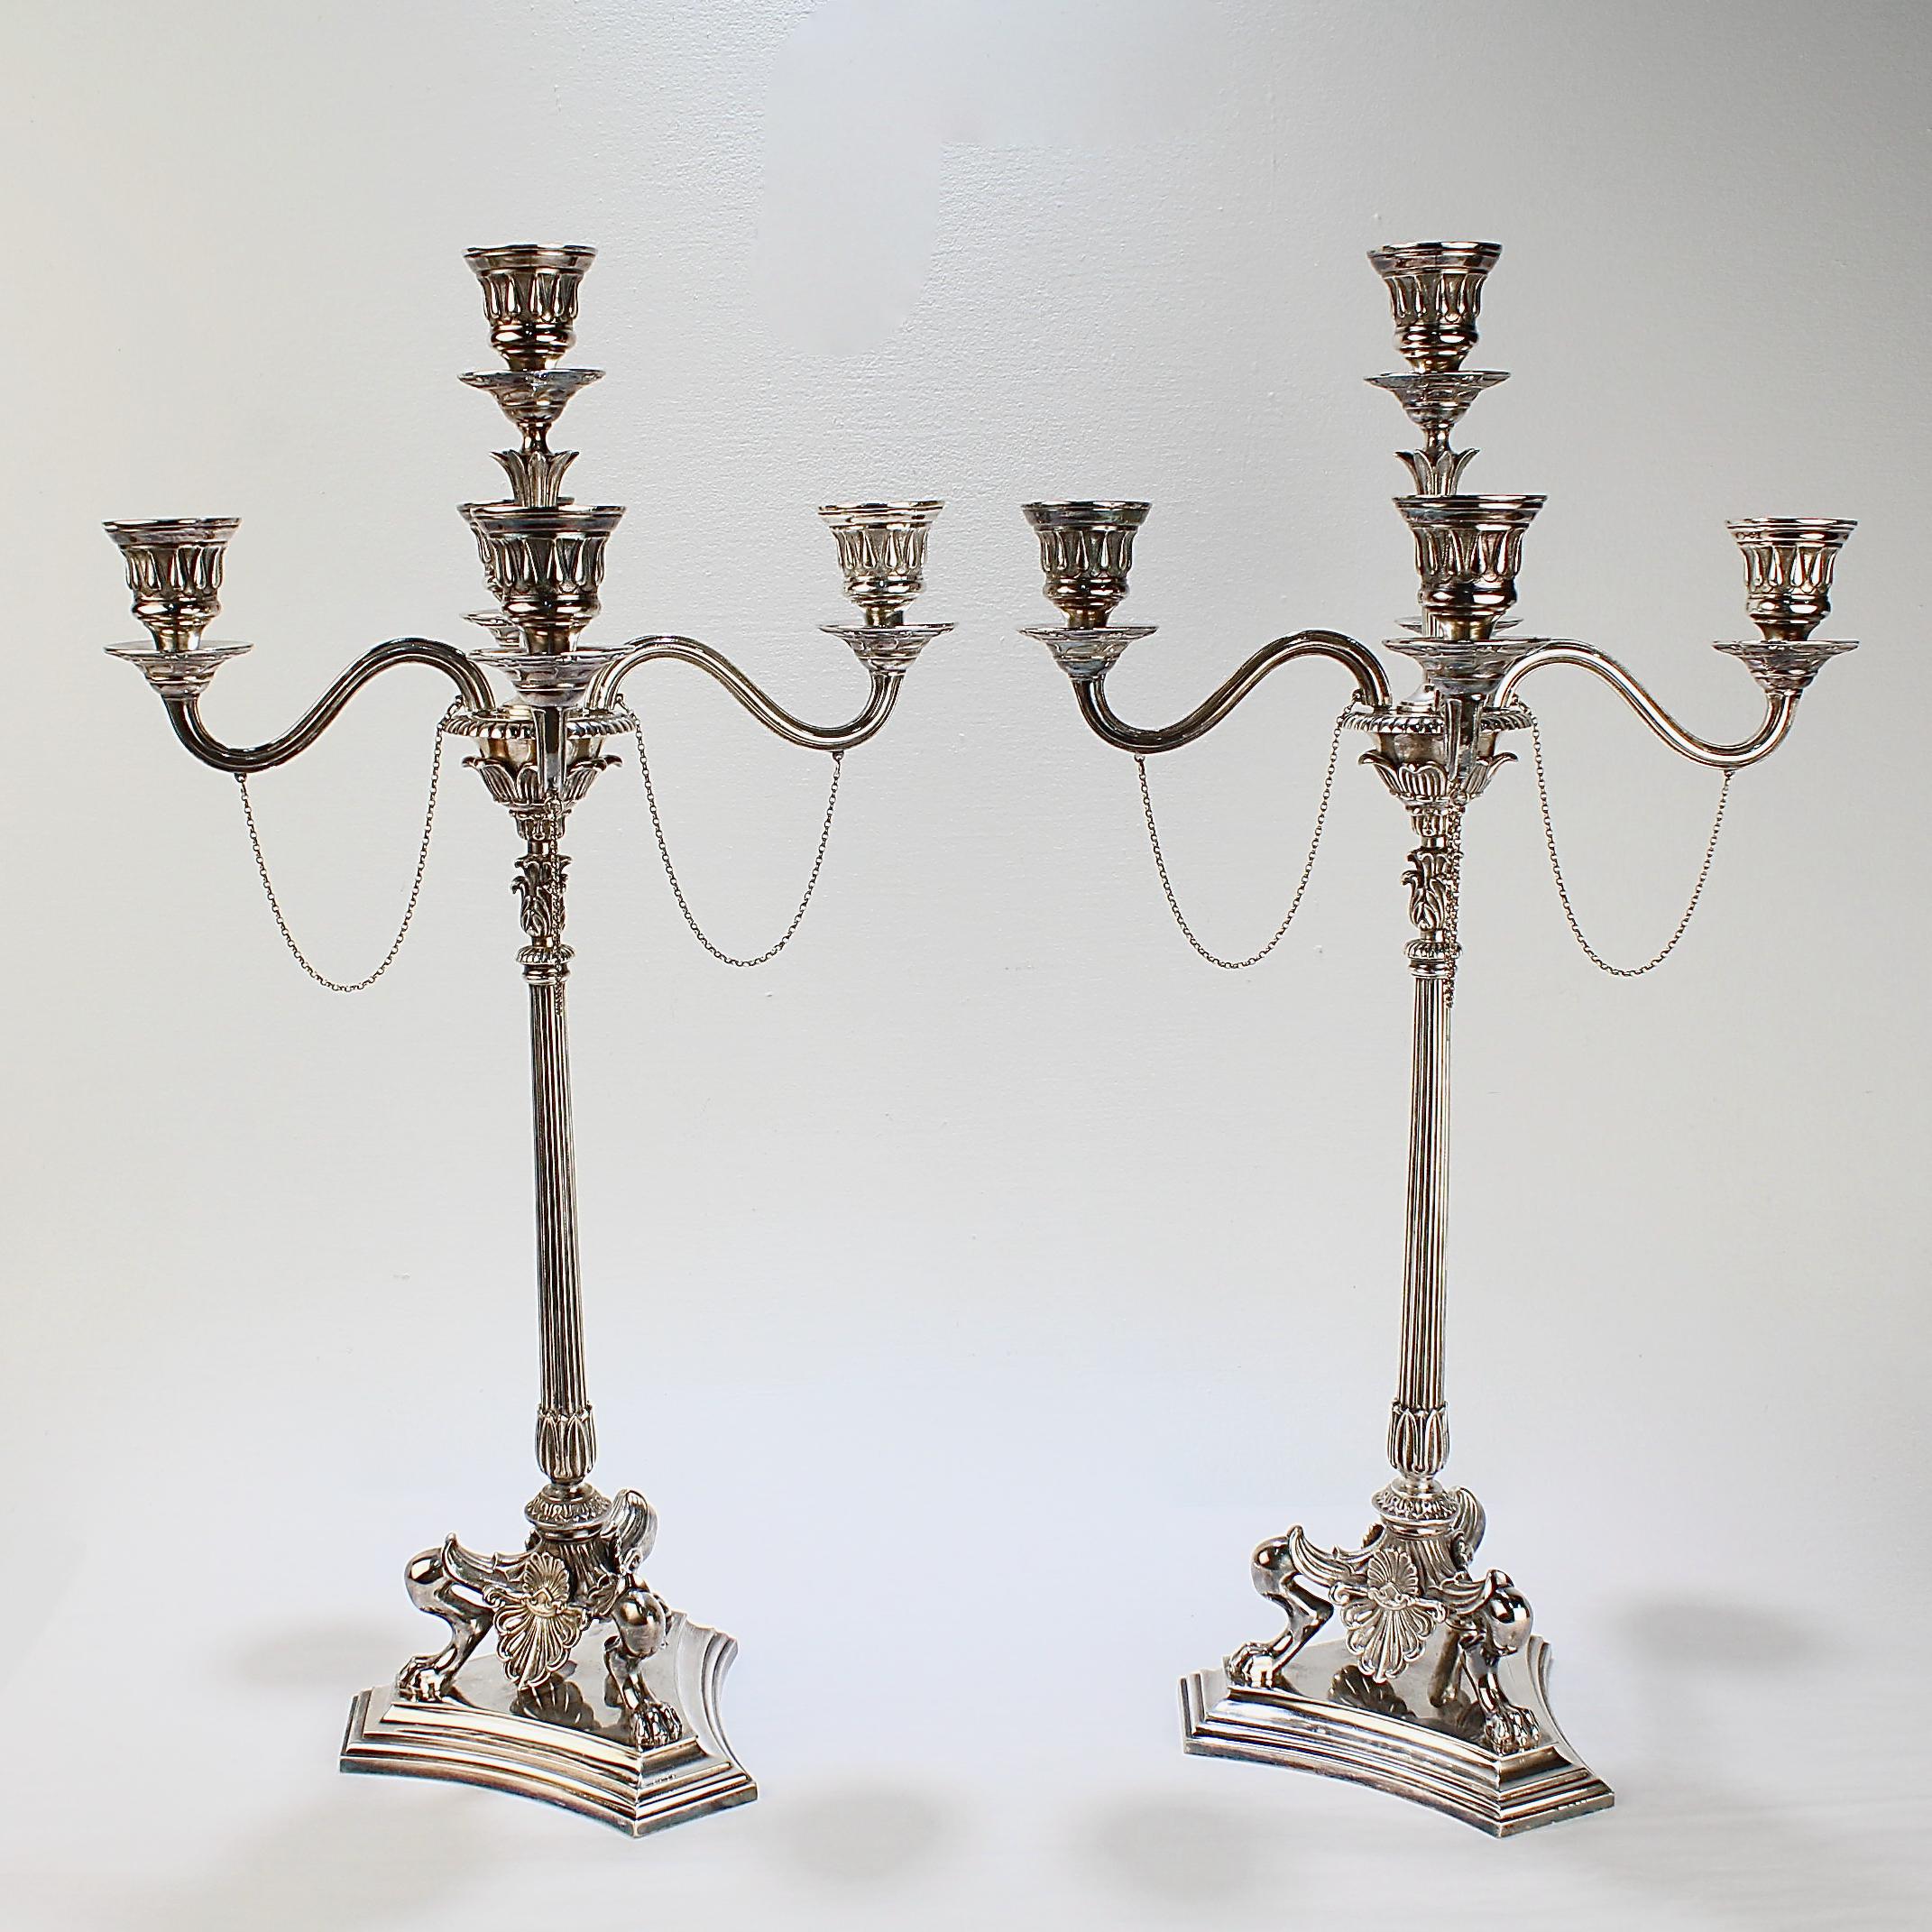 Pair of Elkington & Co Neoclassical Revival Silver Plated Five-Light Candelabra In Good Condition For Sale In Philadelphia, PA